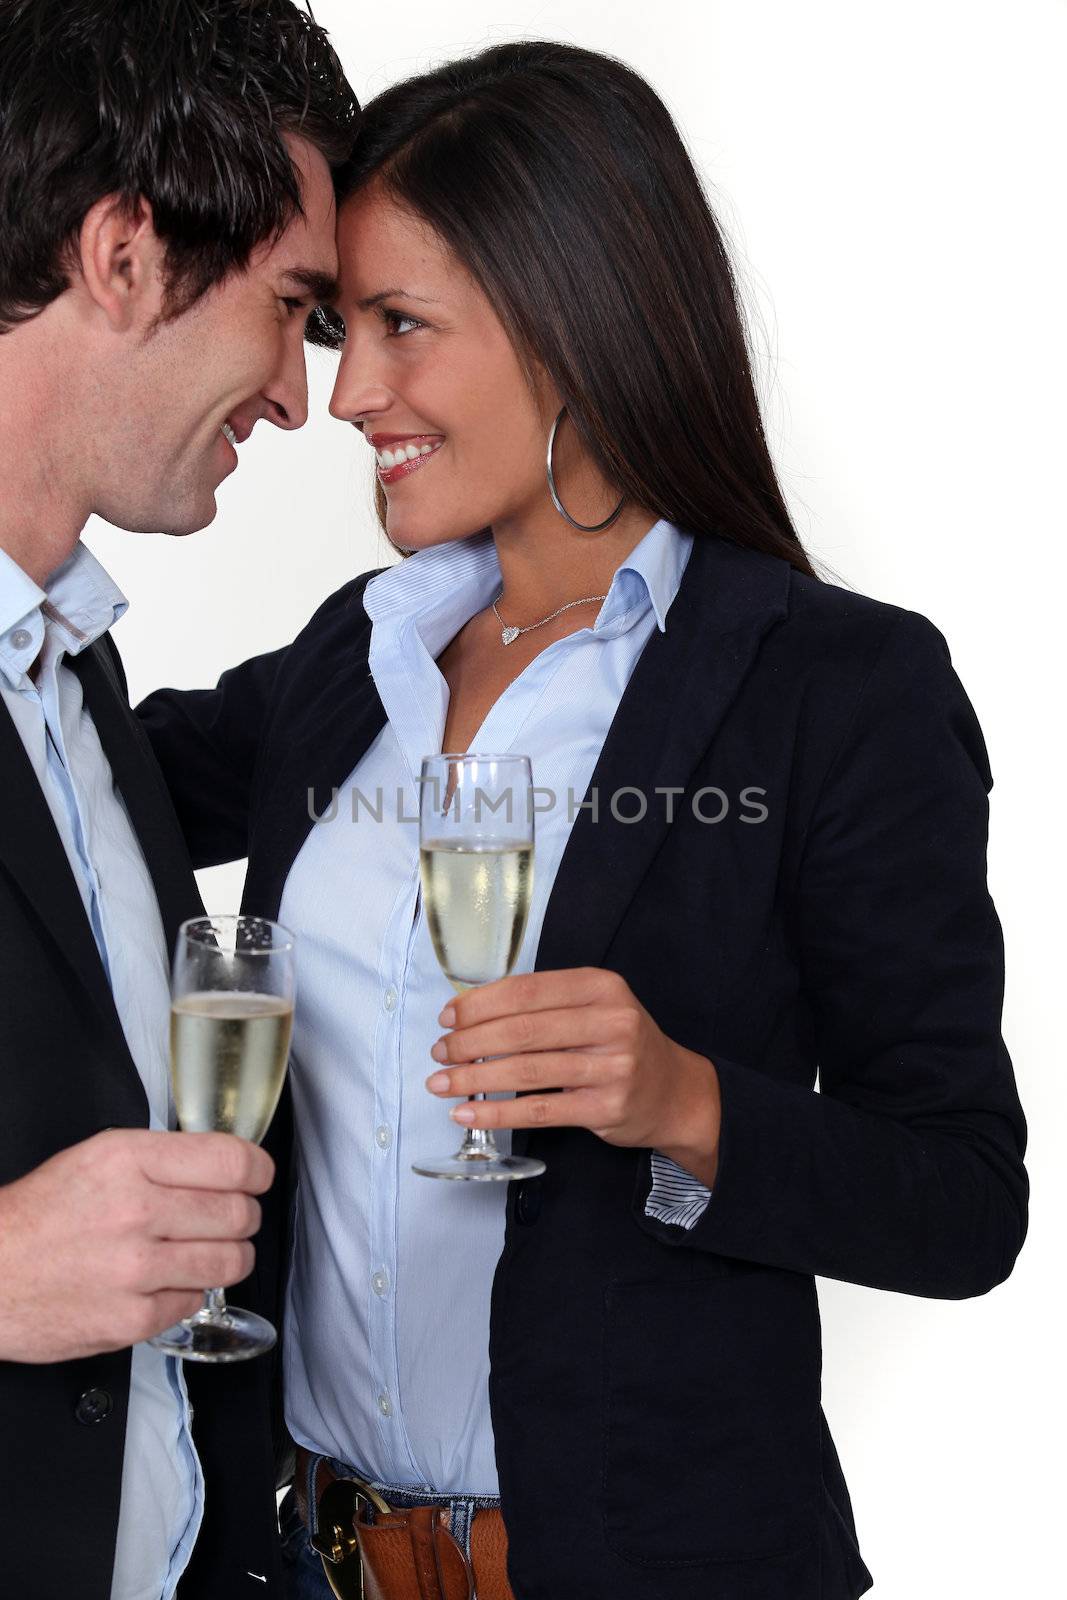 man and woman flirting by phovoir